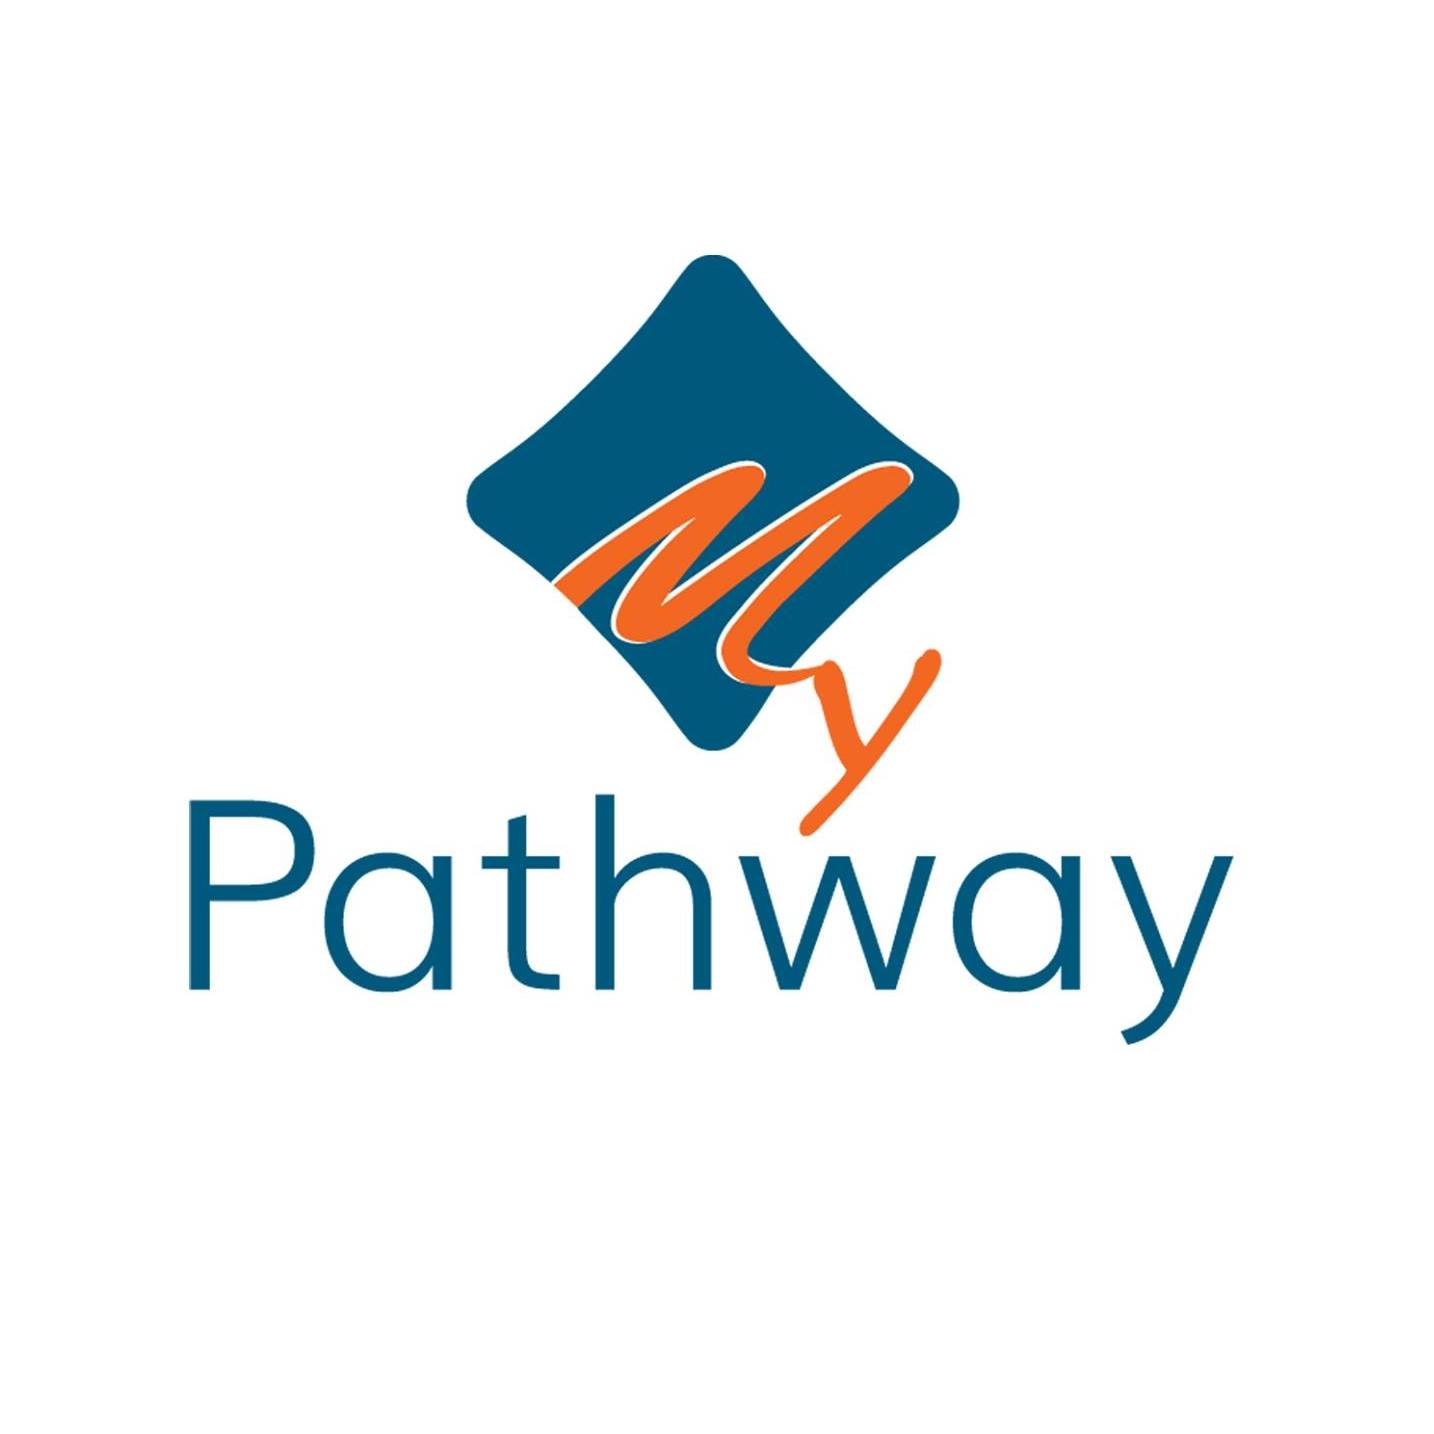 My Pathway group of companies